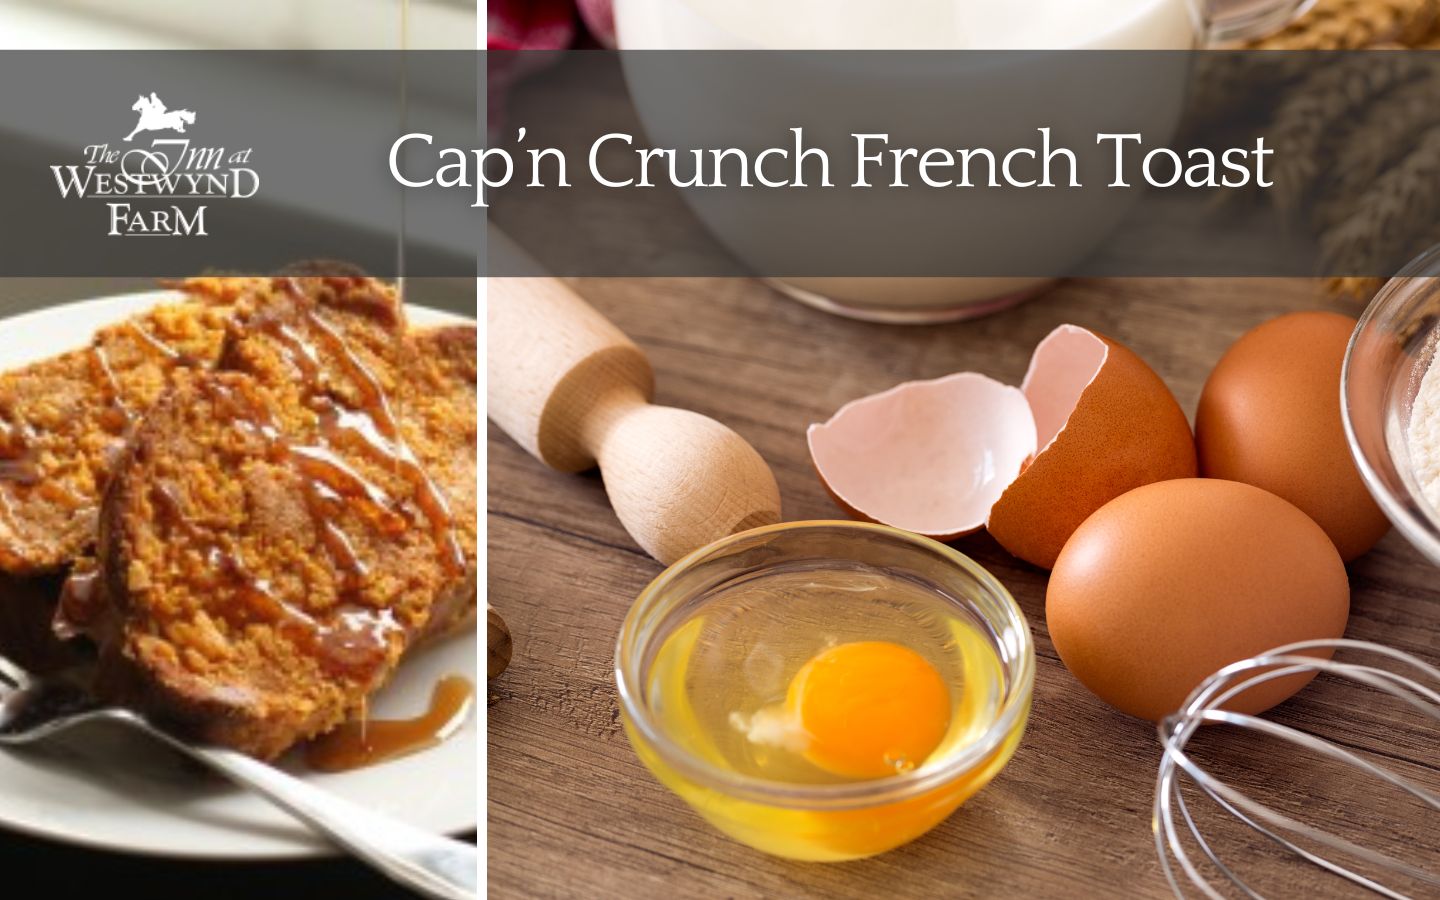 capn crunch french toast on a white place and milk, eggs, and other baking ingredients with inn at westwynd logo